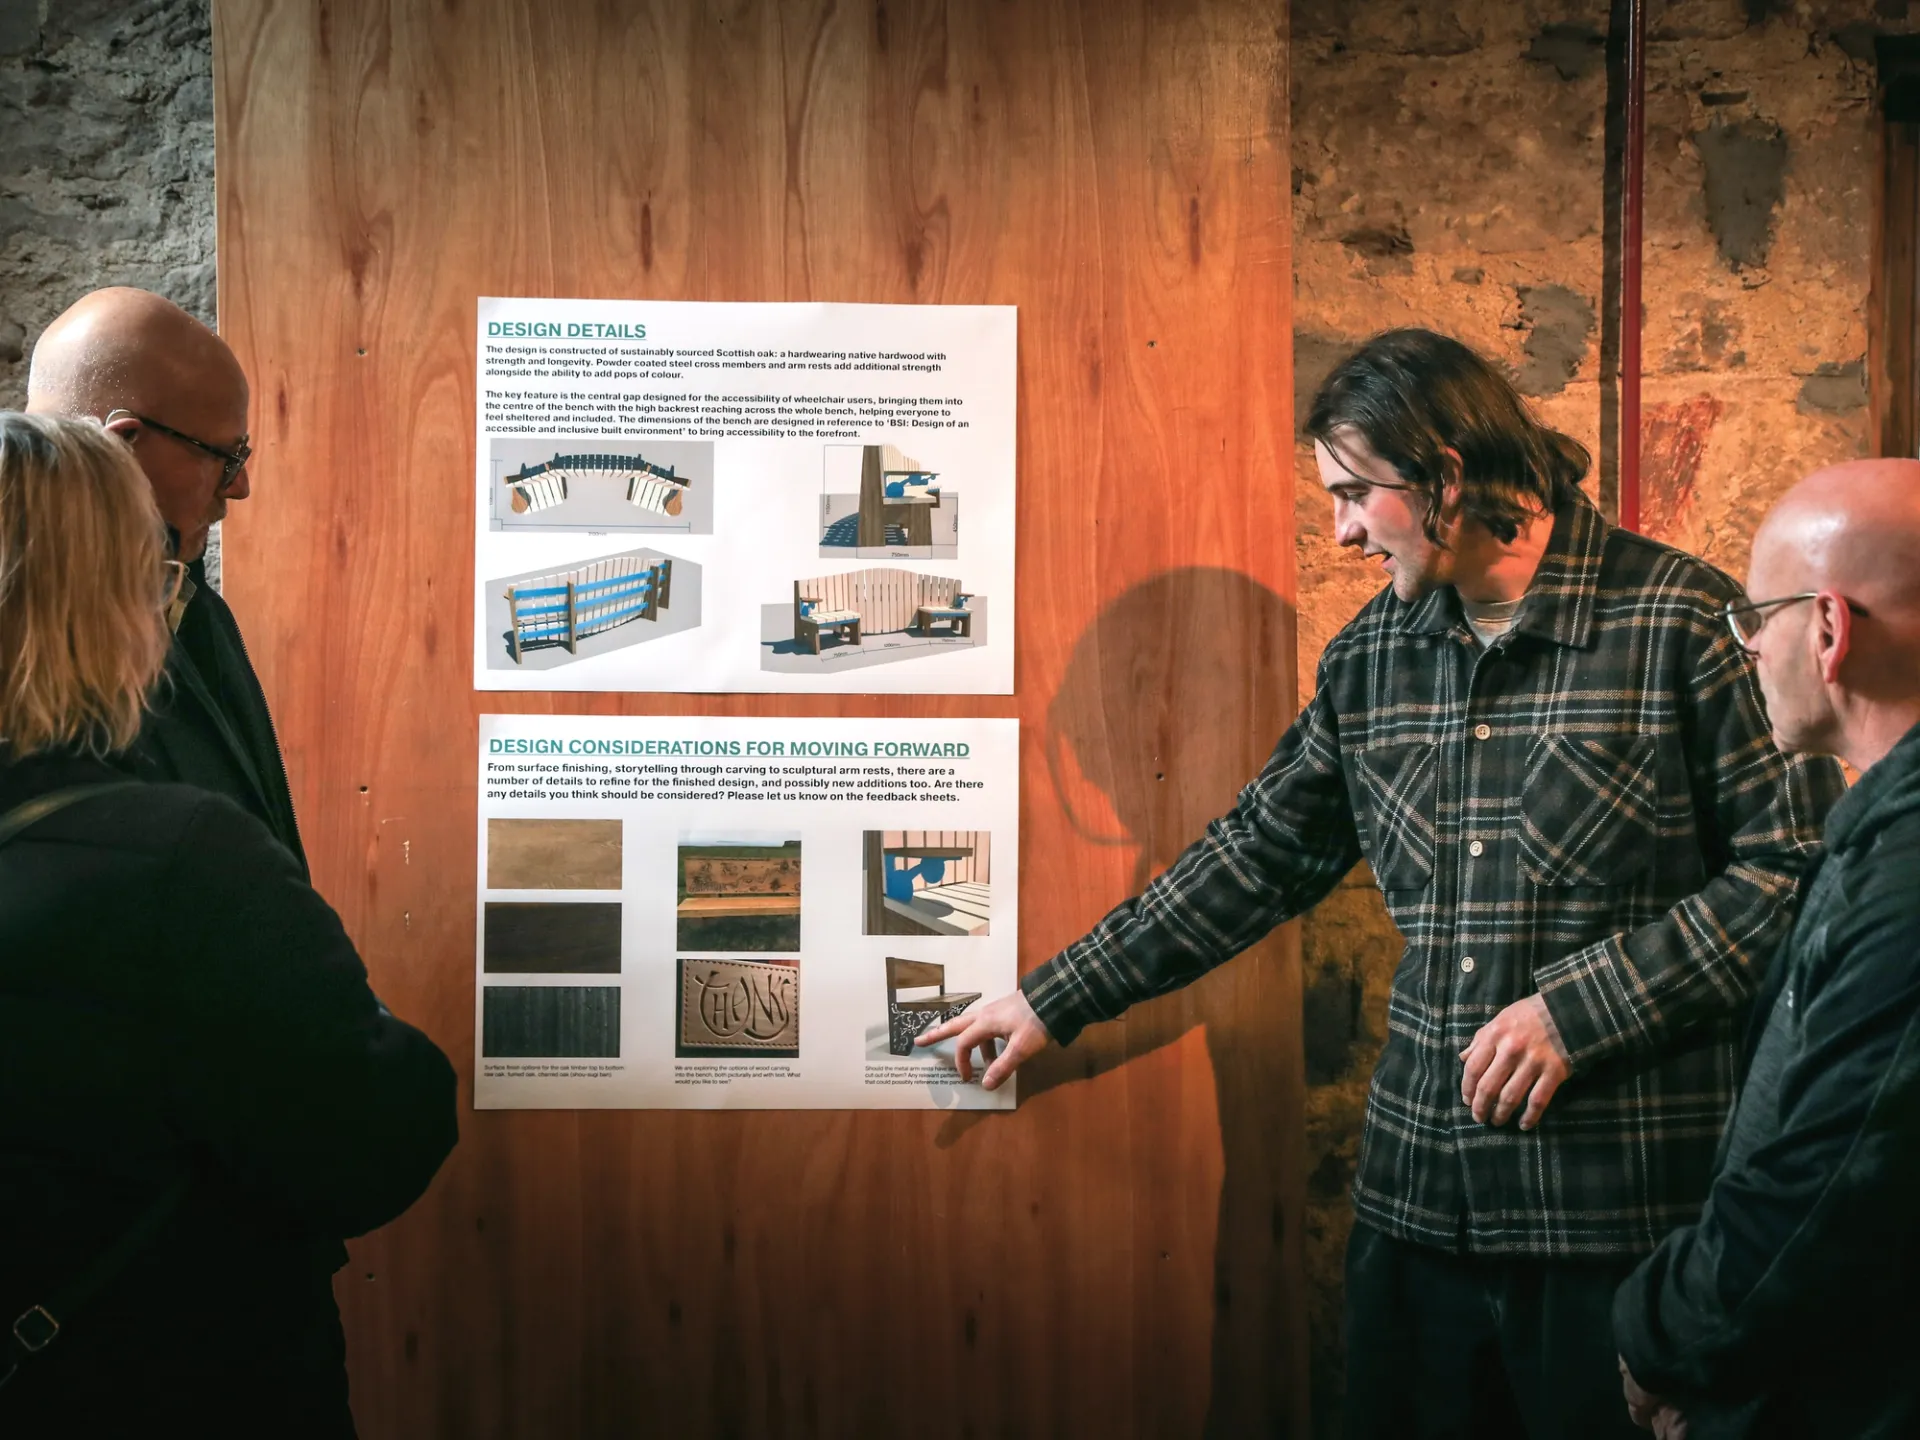 3 people stand looking at posters of bench designs that are mounted into a wooden wall. Another man, in his twenties, points to a part of a design and is talking to the other 3 people.